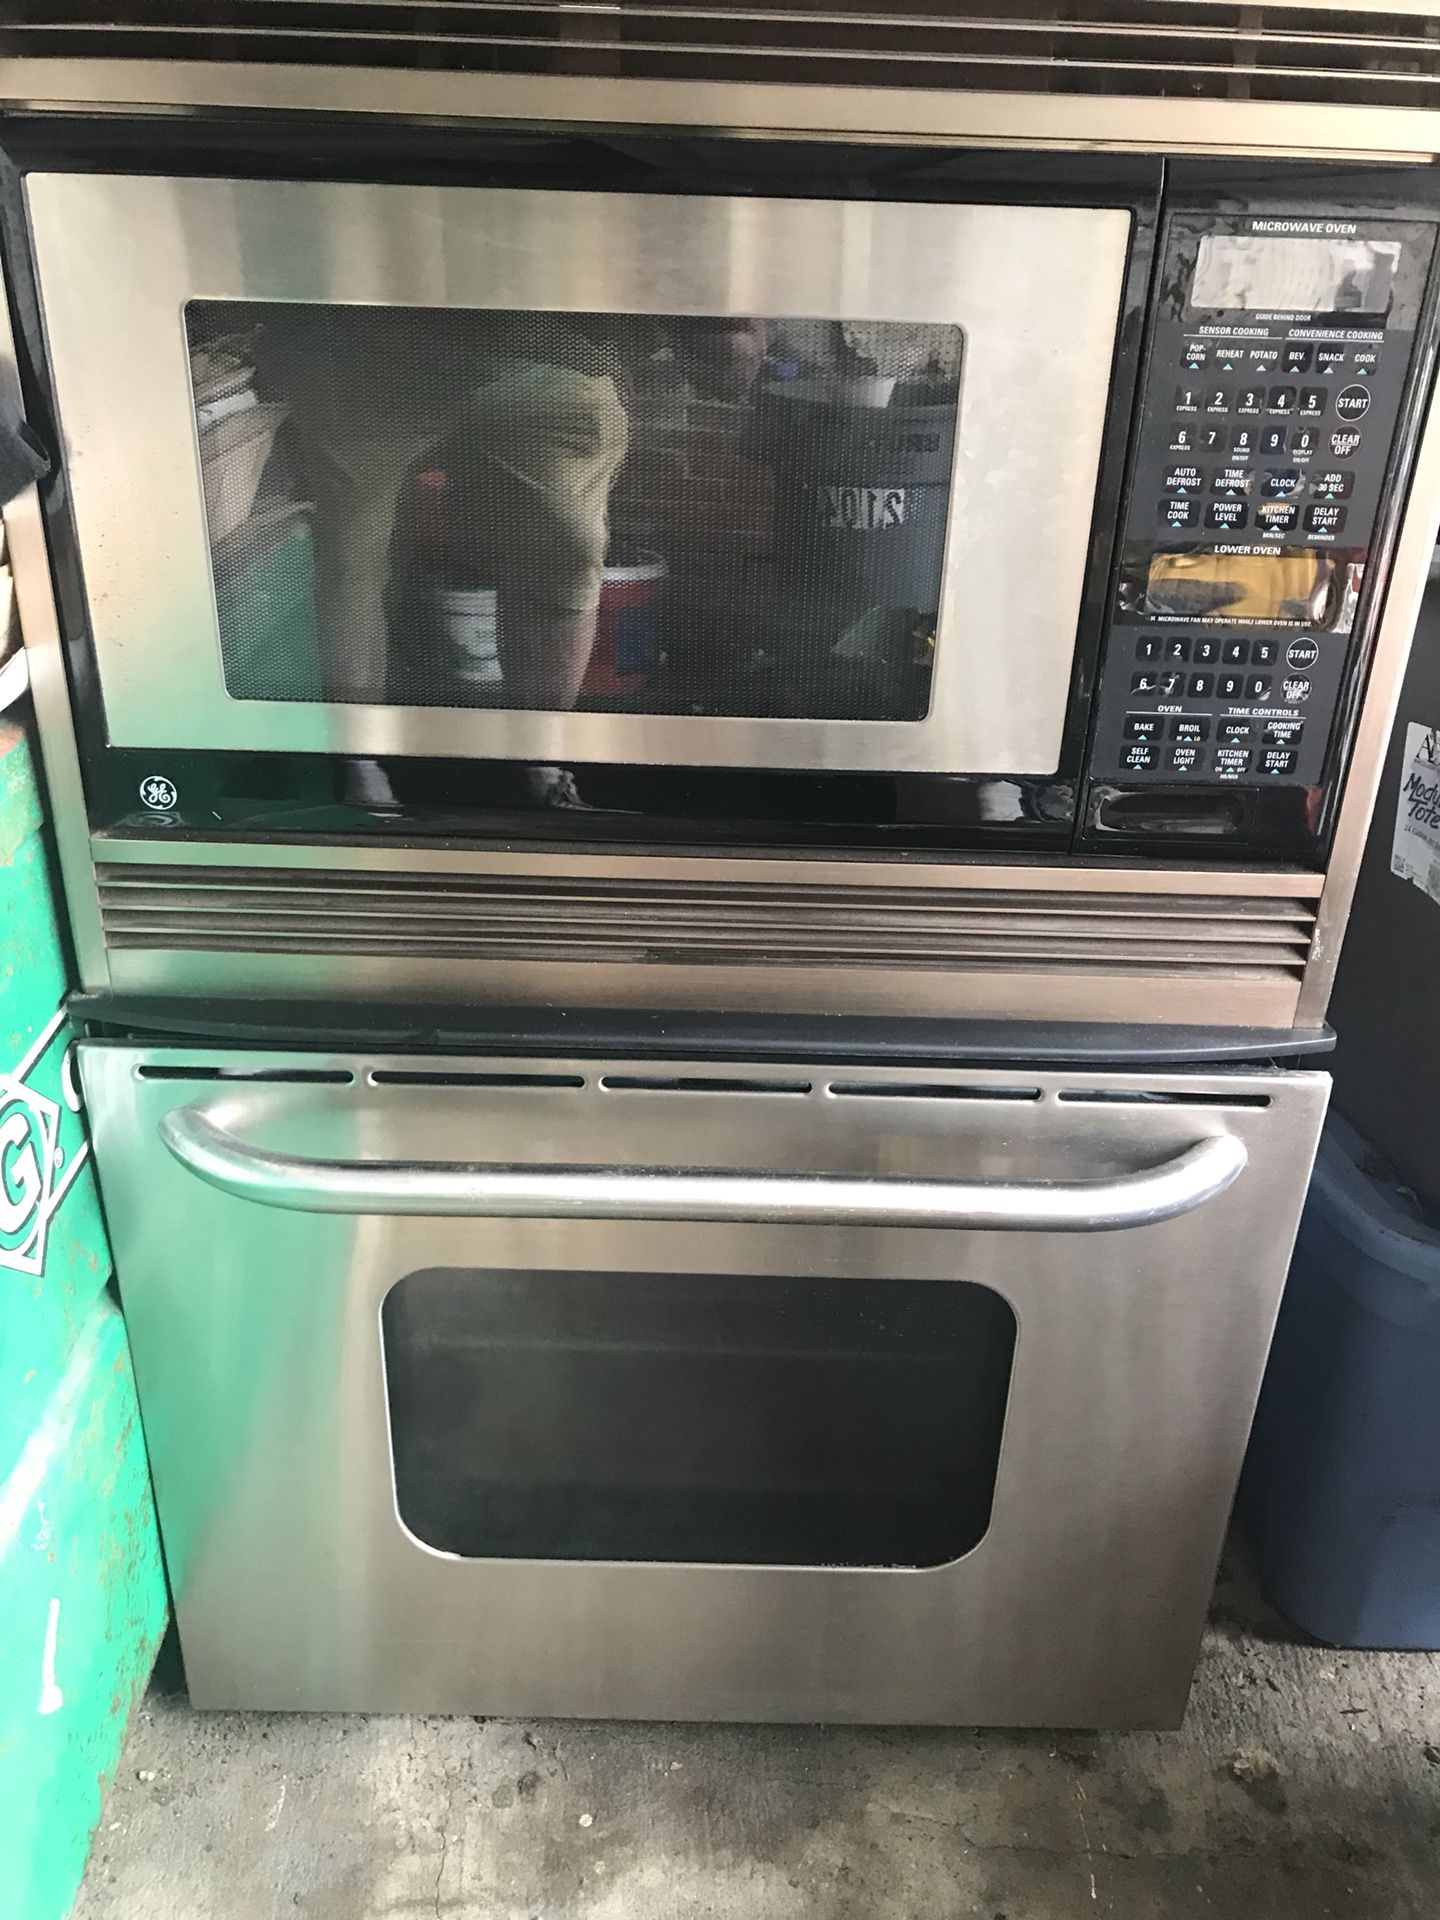 Wall oven and microwave